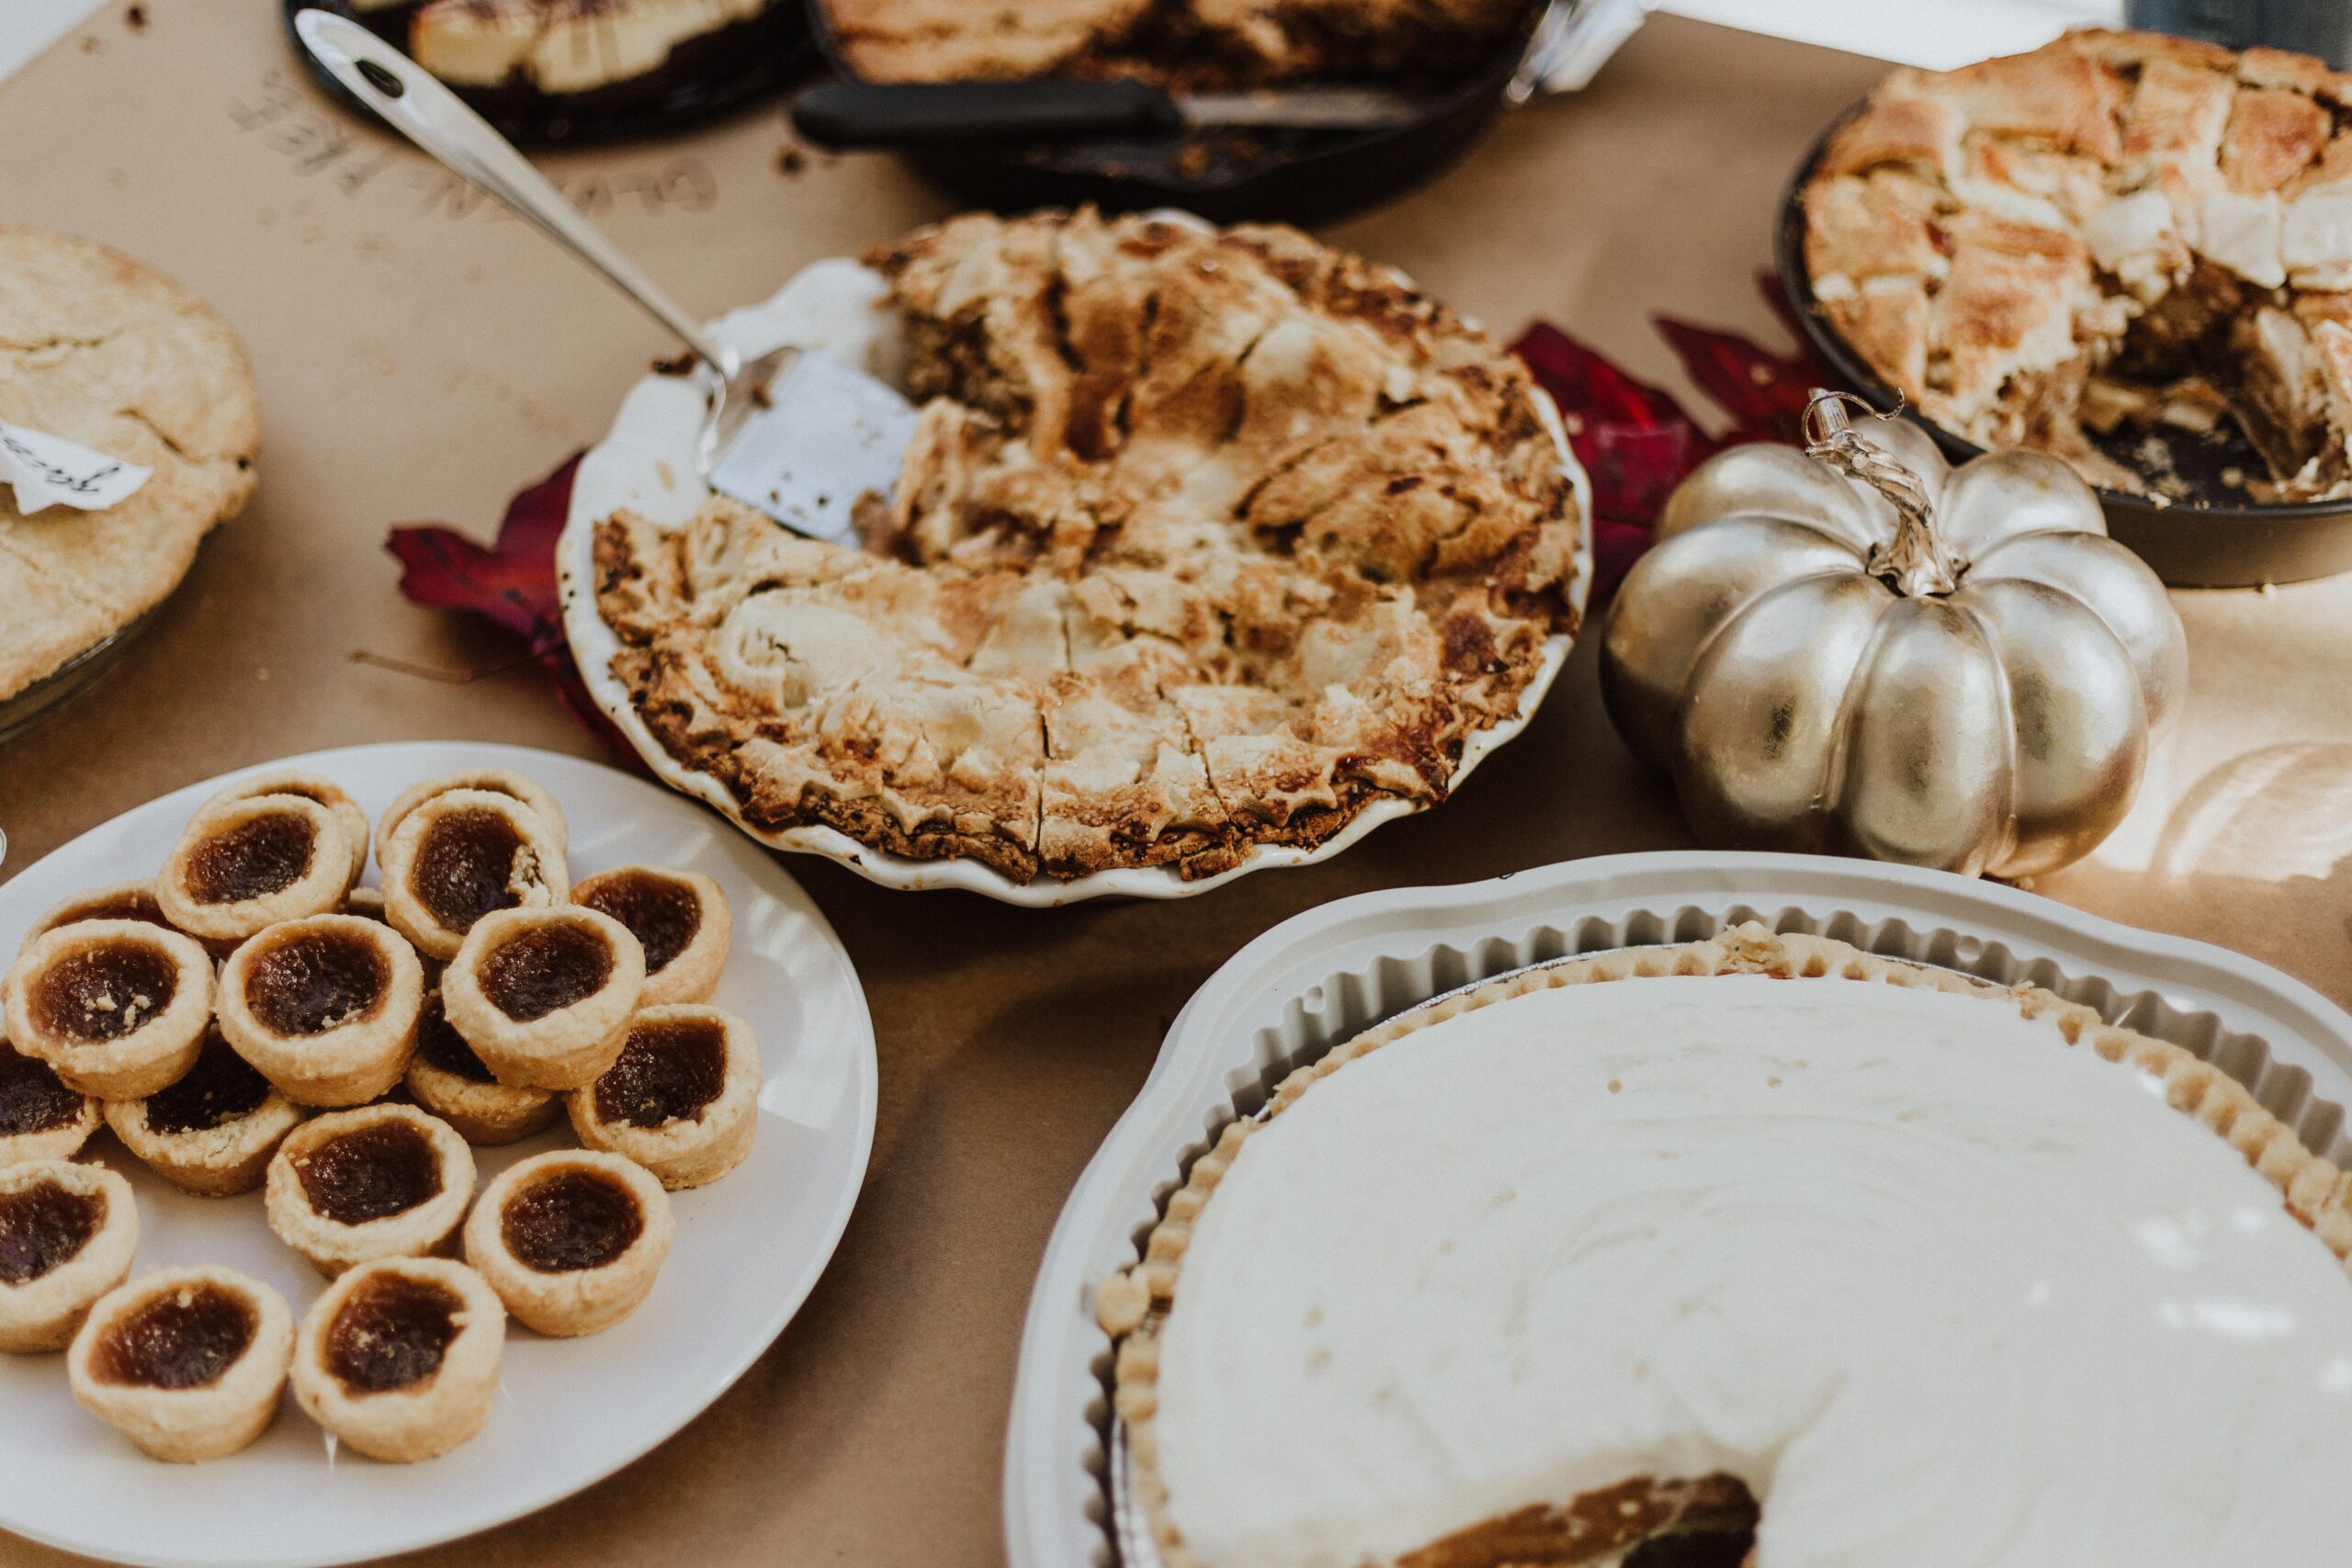 Your menu is one of most important friendsgiving ideas. Plan out a menu by using these hacks and ideas. Pictured: A table with desserts.